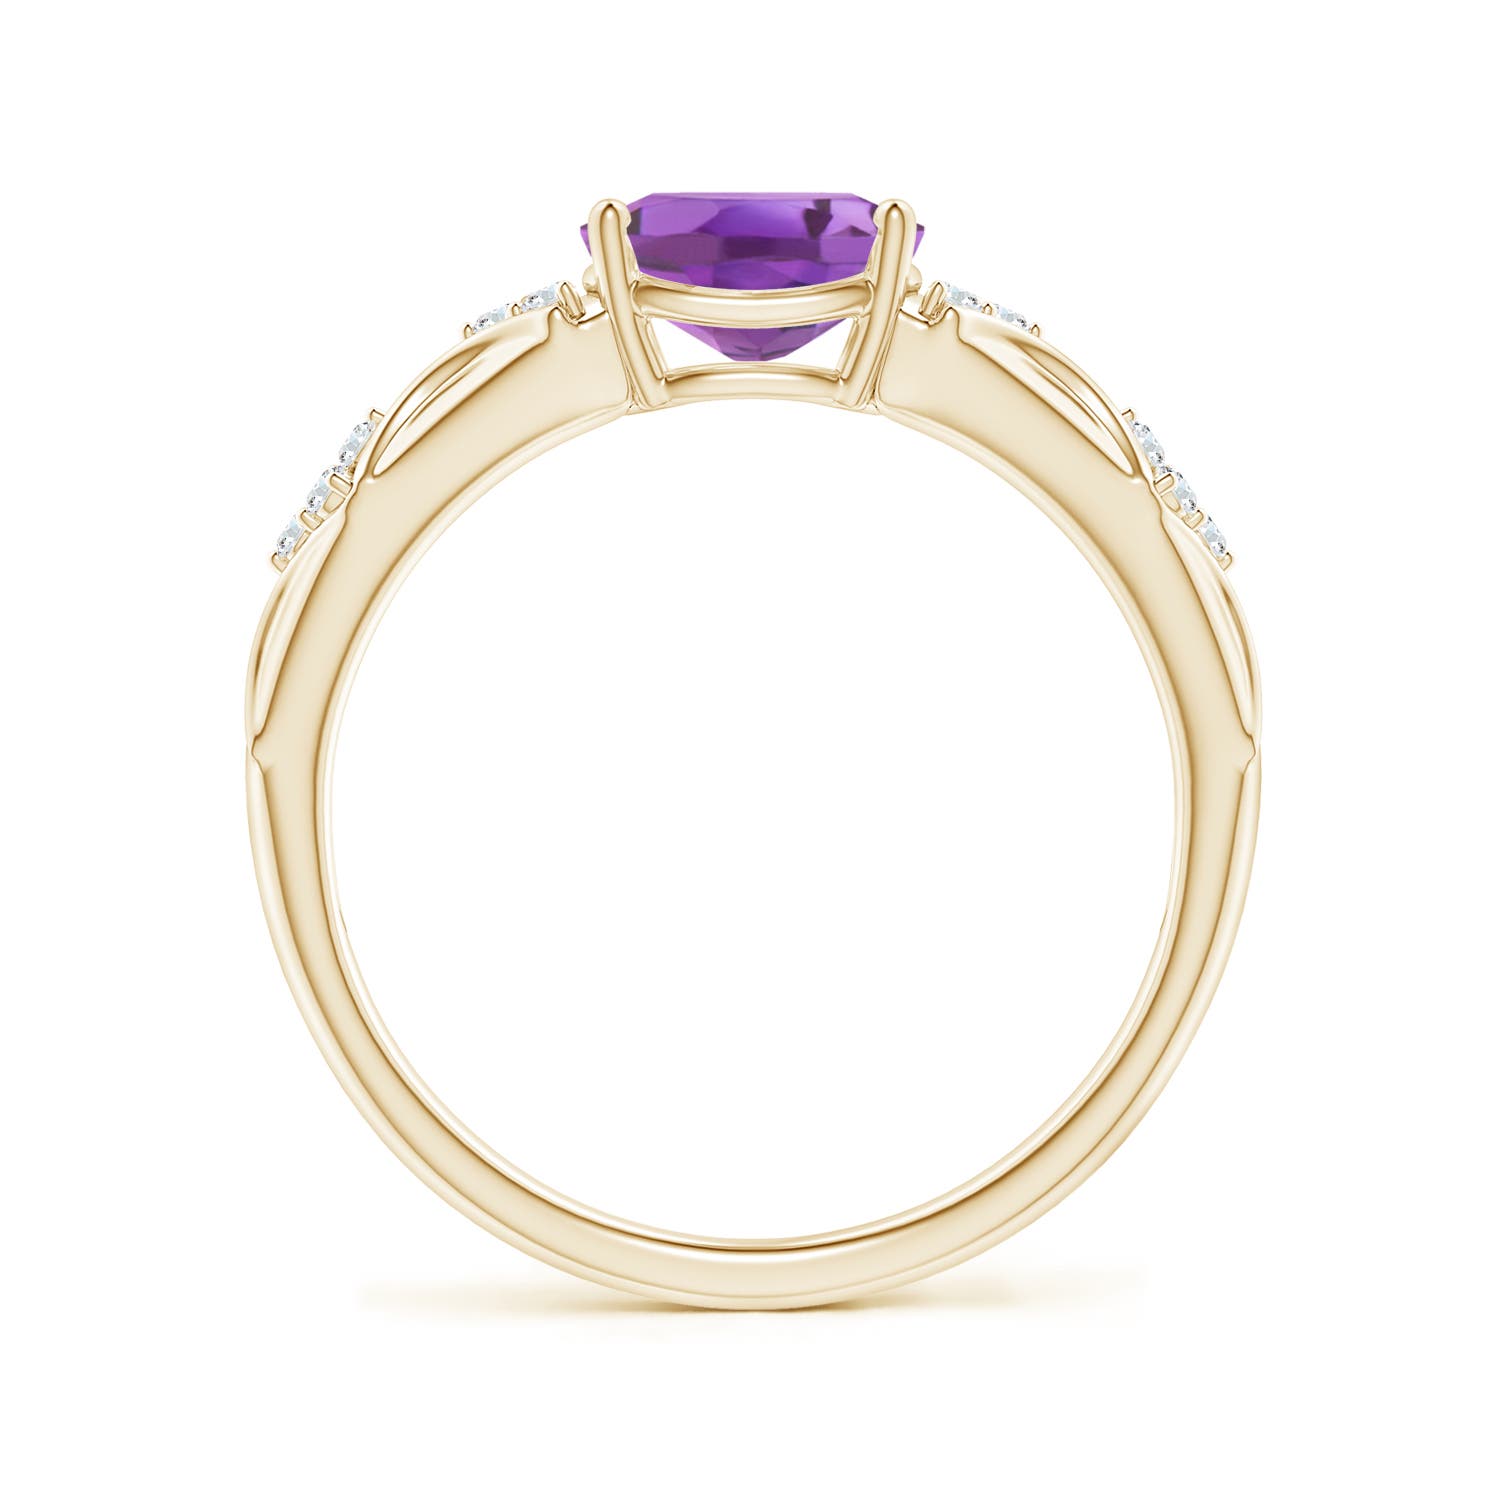 A - Amethyst / 1.22 CT / 14 KT Yellow Gold